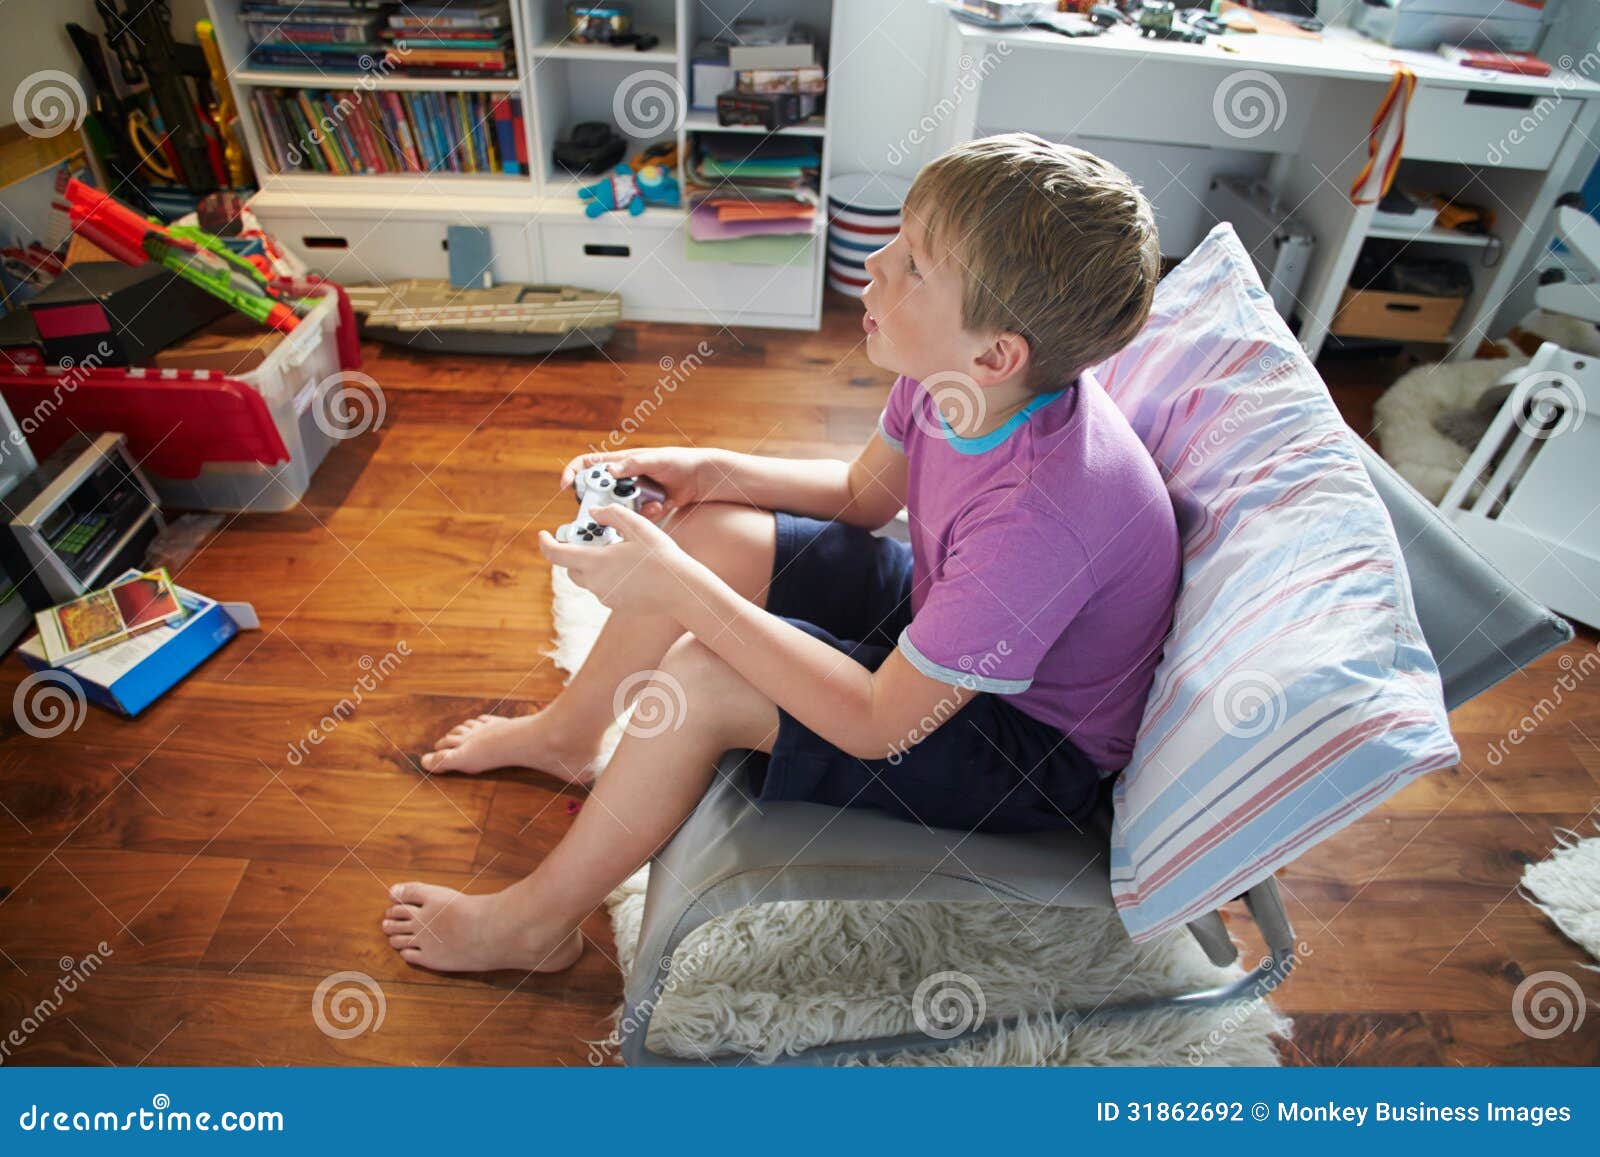 Young Boy Playing Video Game In Bedroom Stock Photography - Image ...